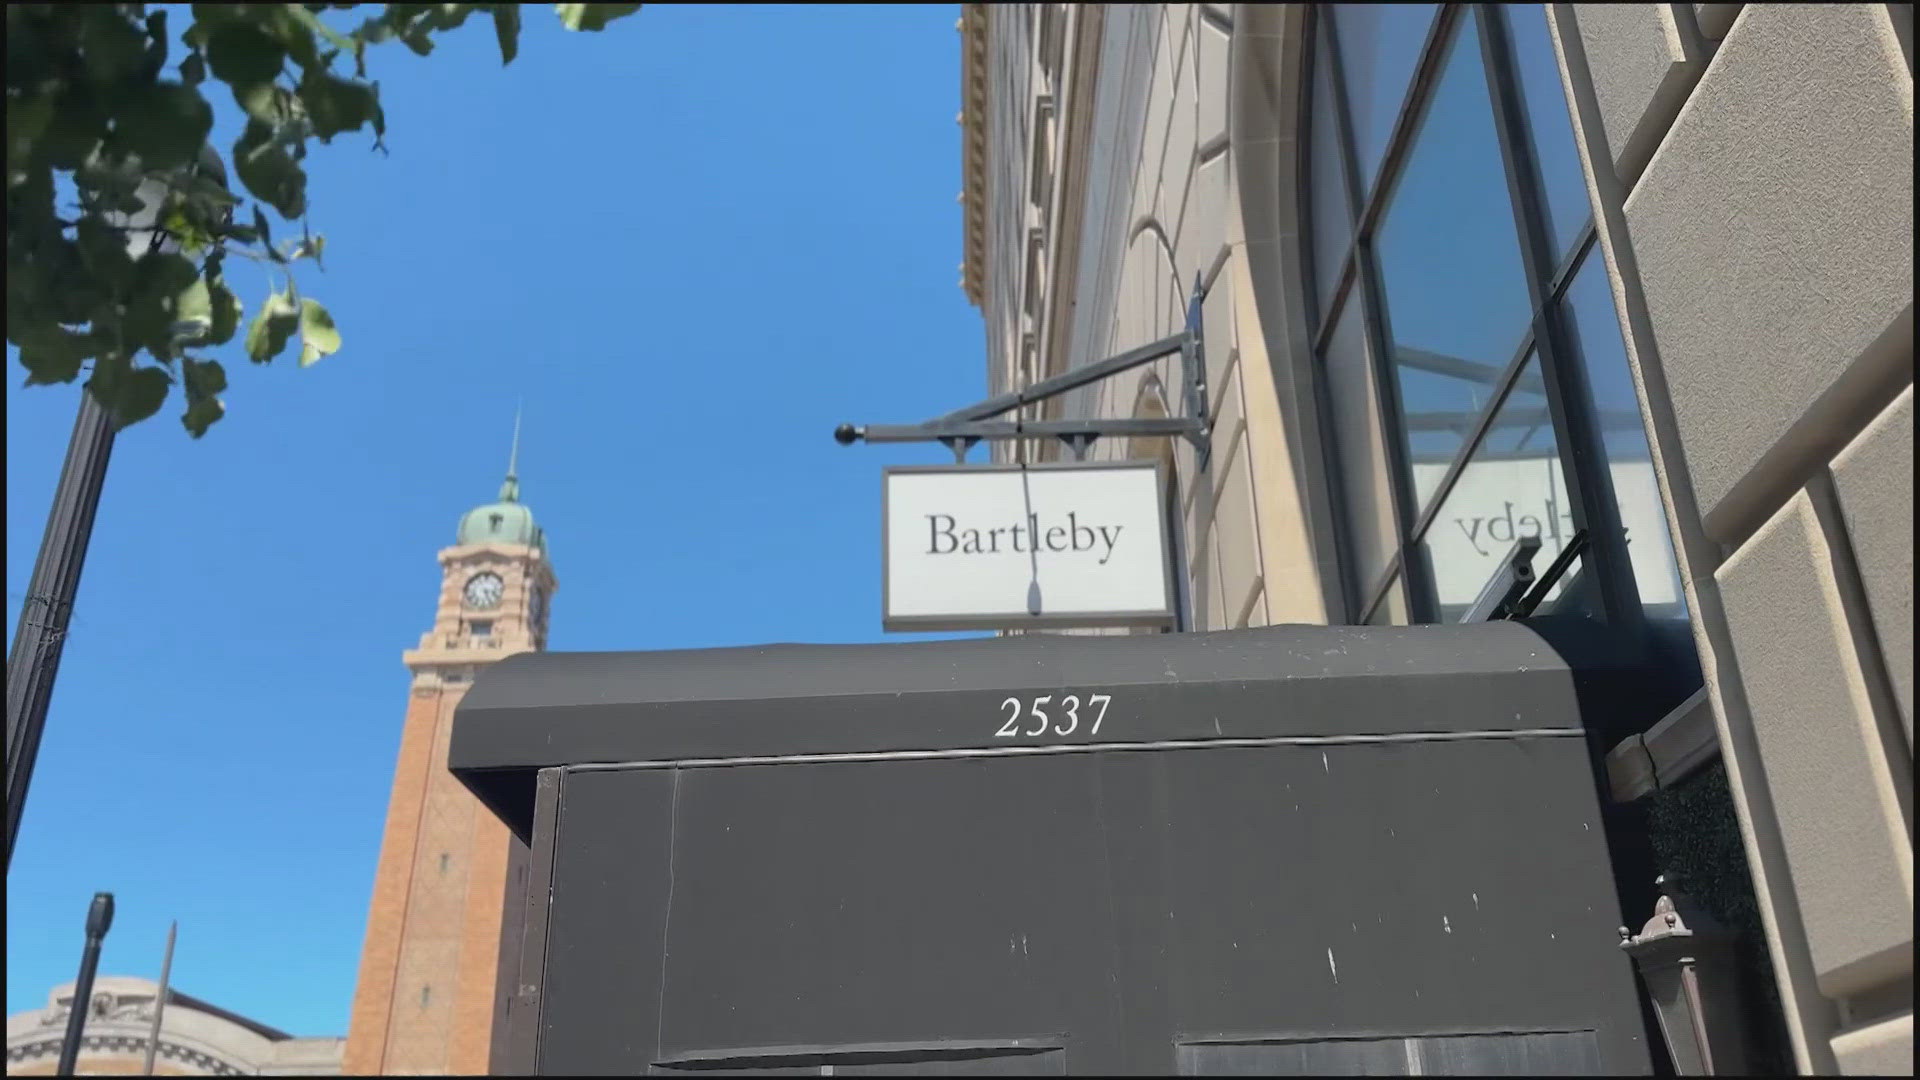 Bartleby was originally built as a bank in the 1920s. It's now one of Cleveland's trendiest restaurants.